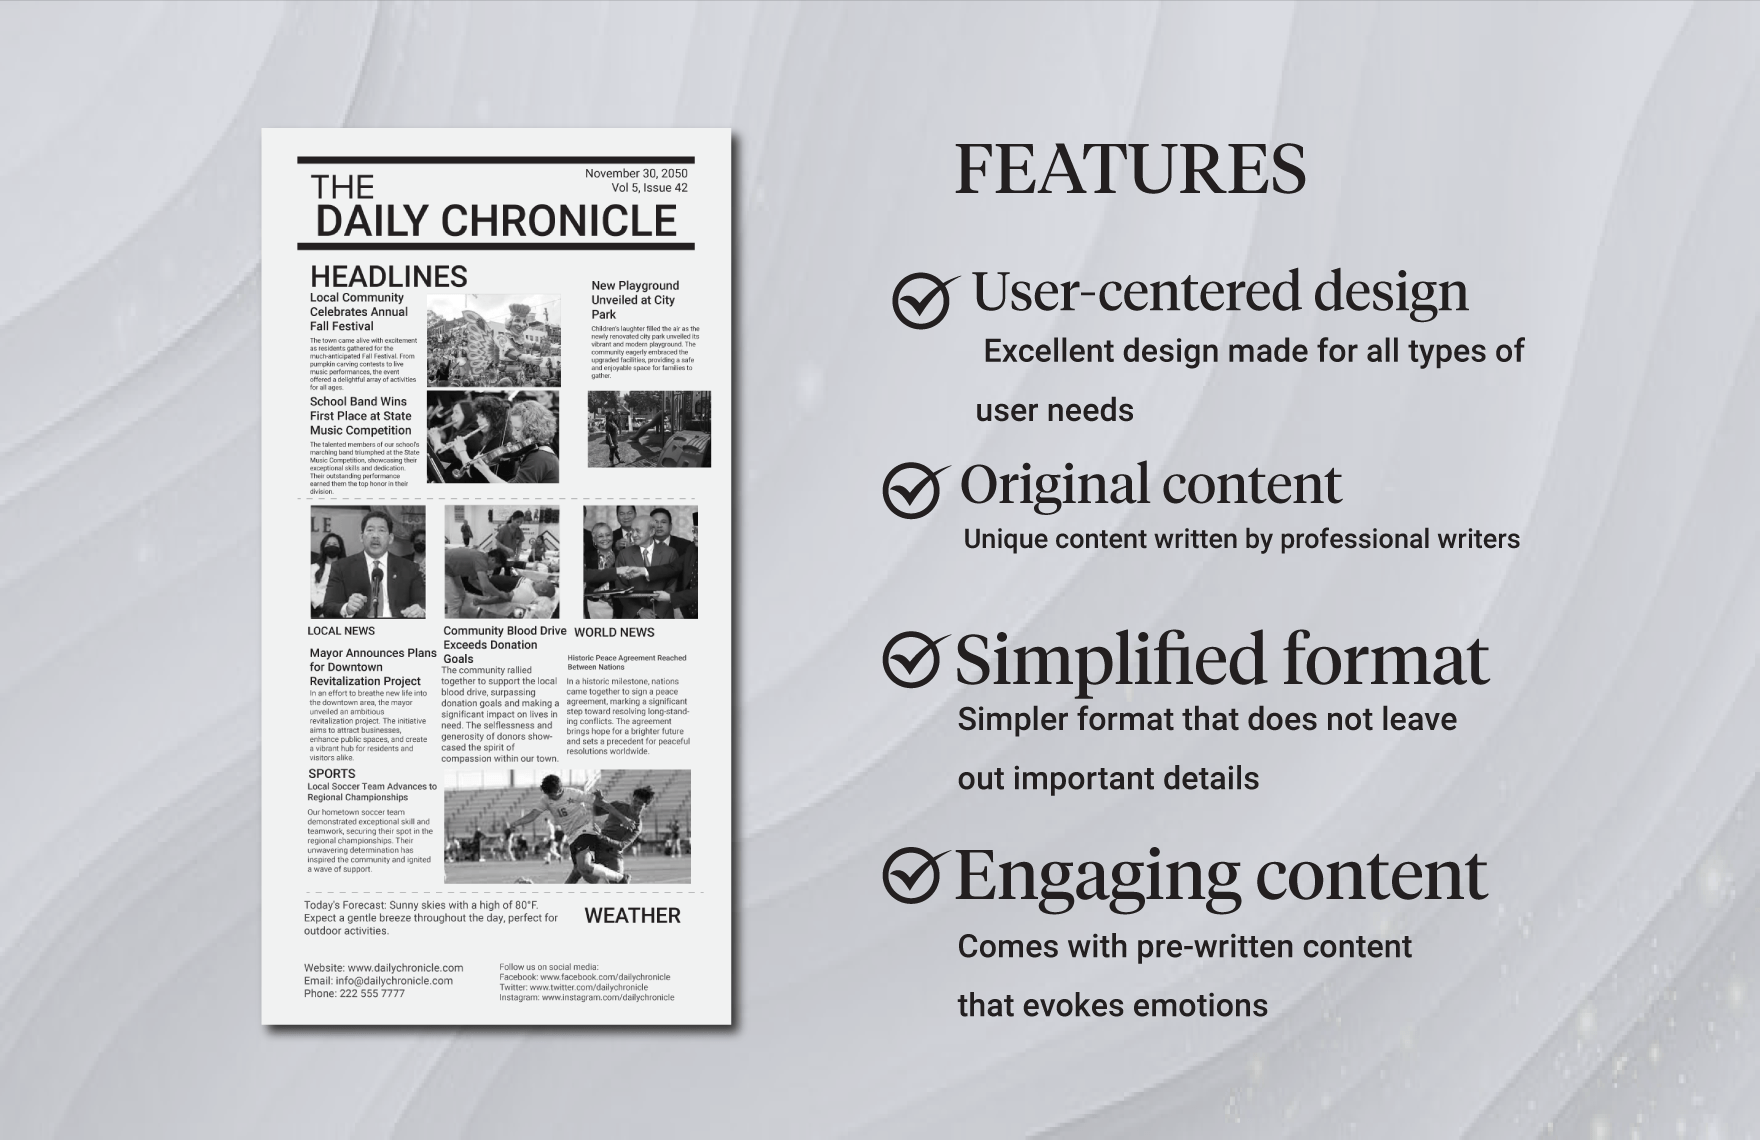 Simple Newspaper Front Page Template